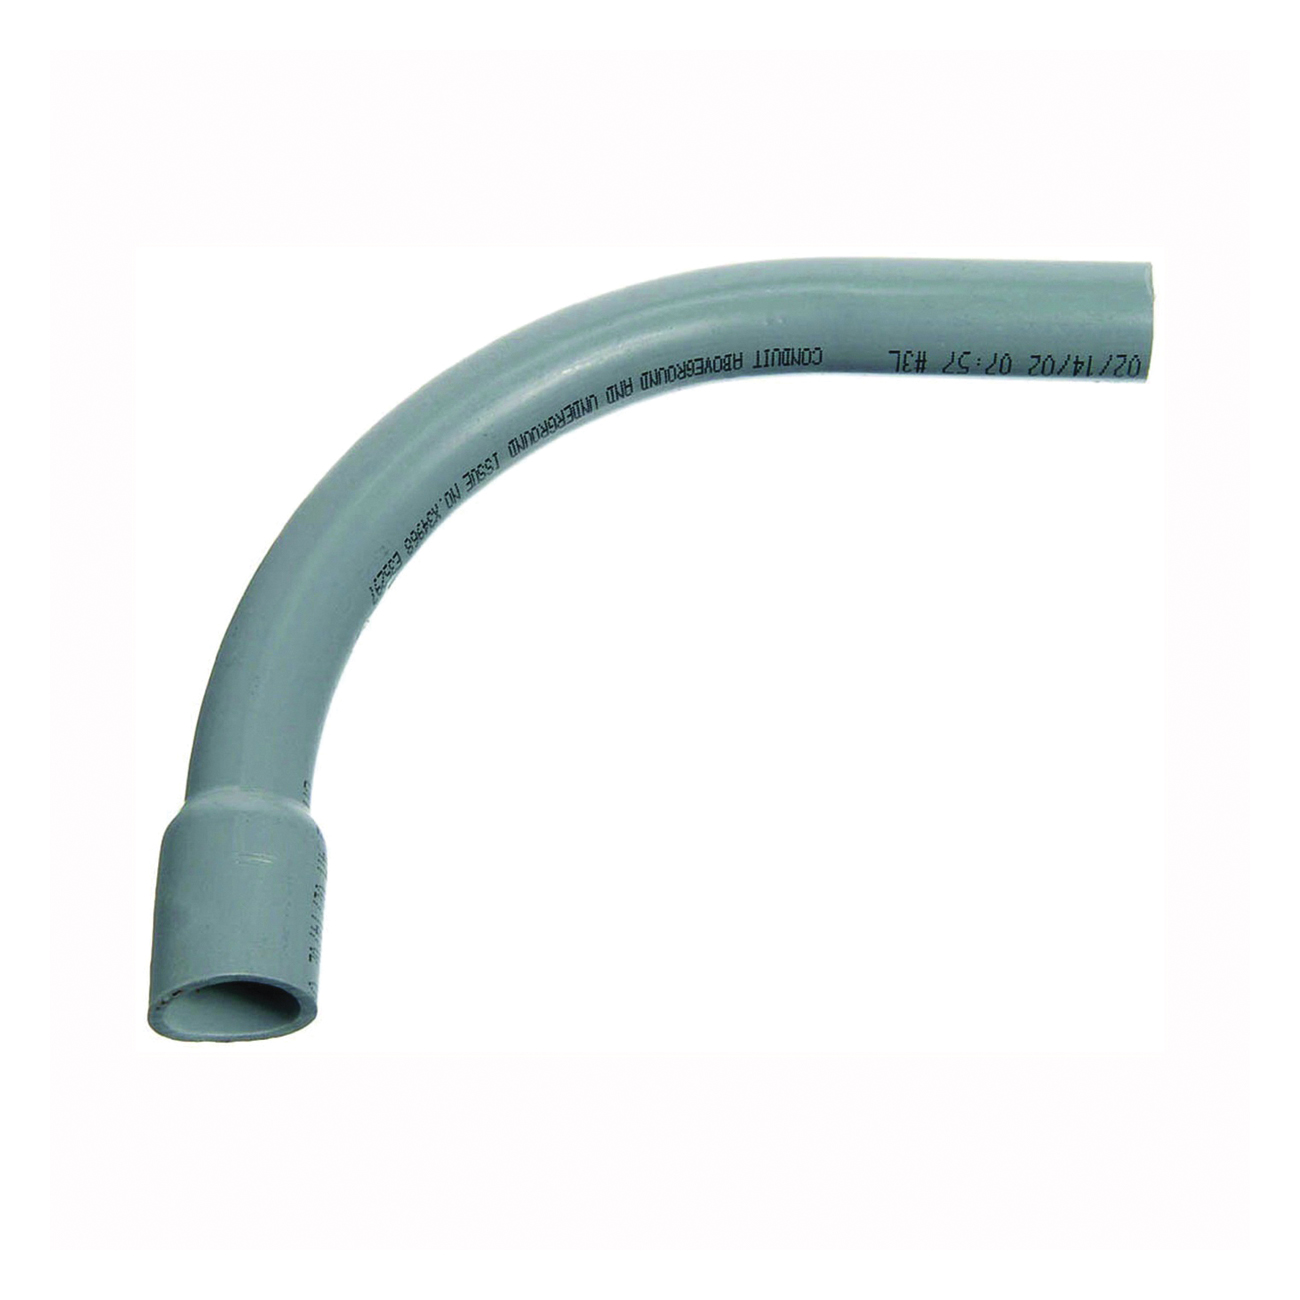 Carlon UA9AFB-CTN Elbow, 1 in Trade Size, 90 deg Angle, SCH 40 Schedule Rating, PVC, Bell End, Gray